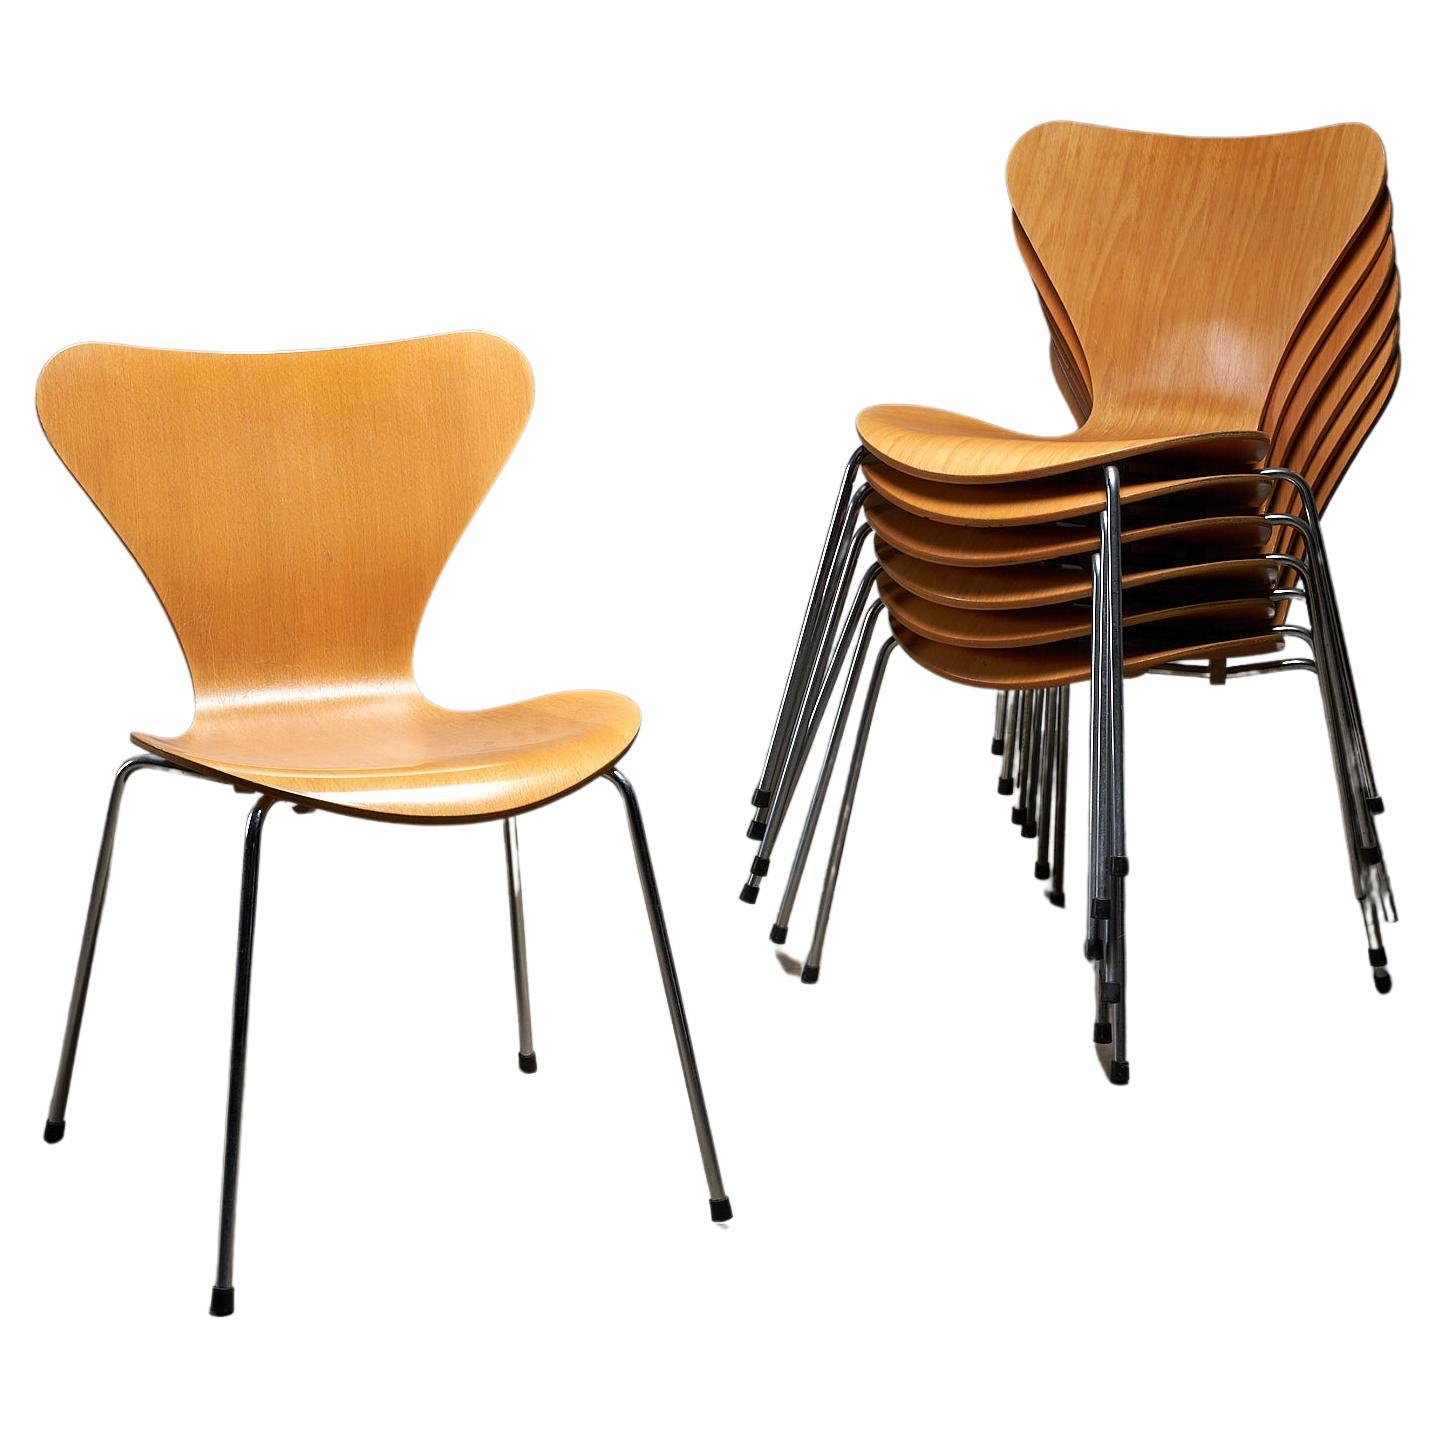 Introducing the iconic Series 7 chairs by Arne Jacobsen for Fritz Hansen. These Scandinavian Modern masterpieces exude timeless elegance, making them perfect for dining or office use. With 12 pieces available, elevate your space with these classic